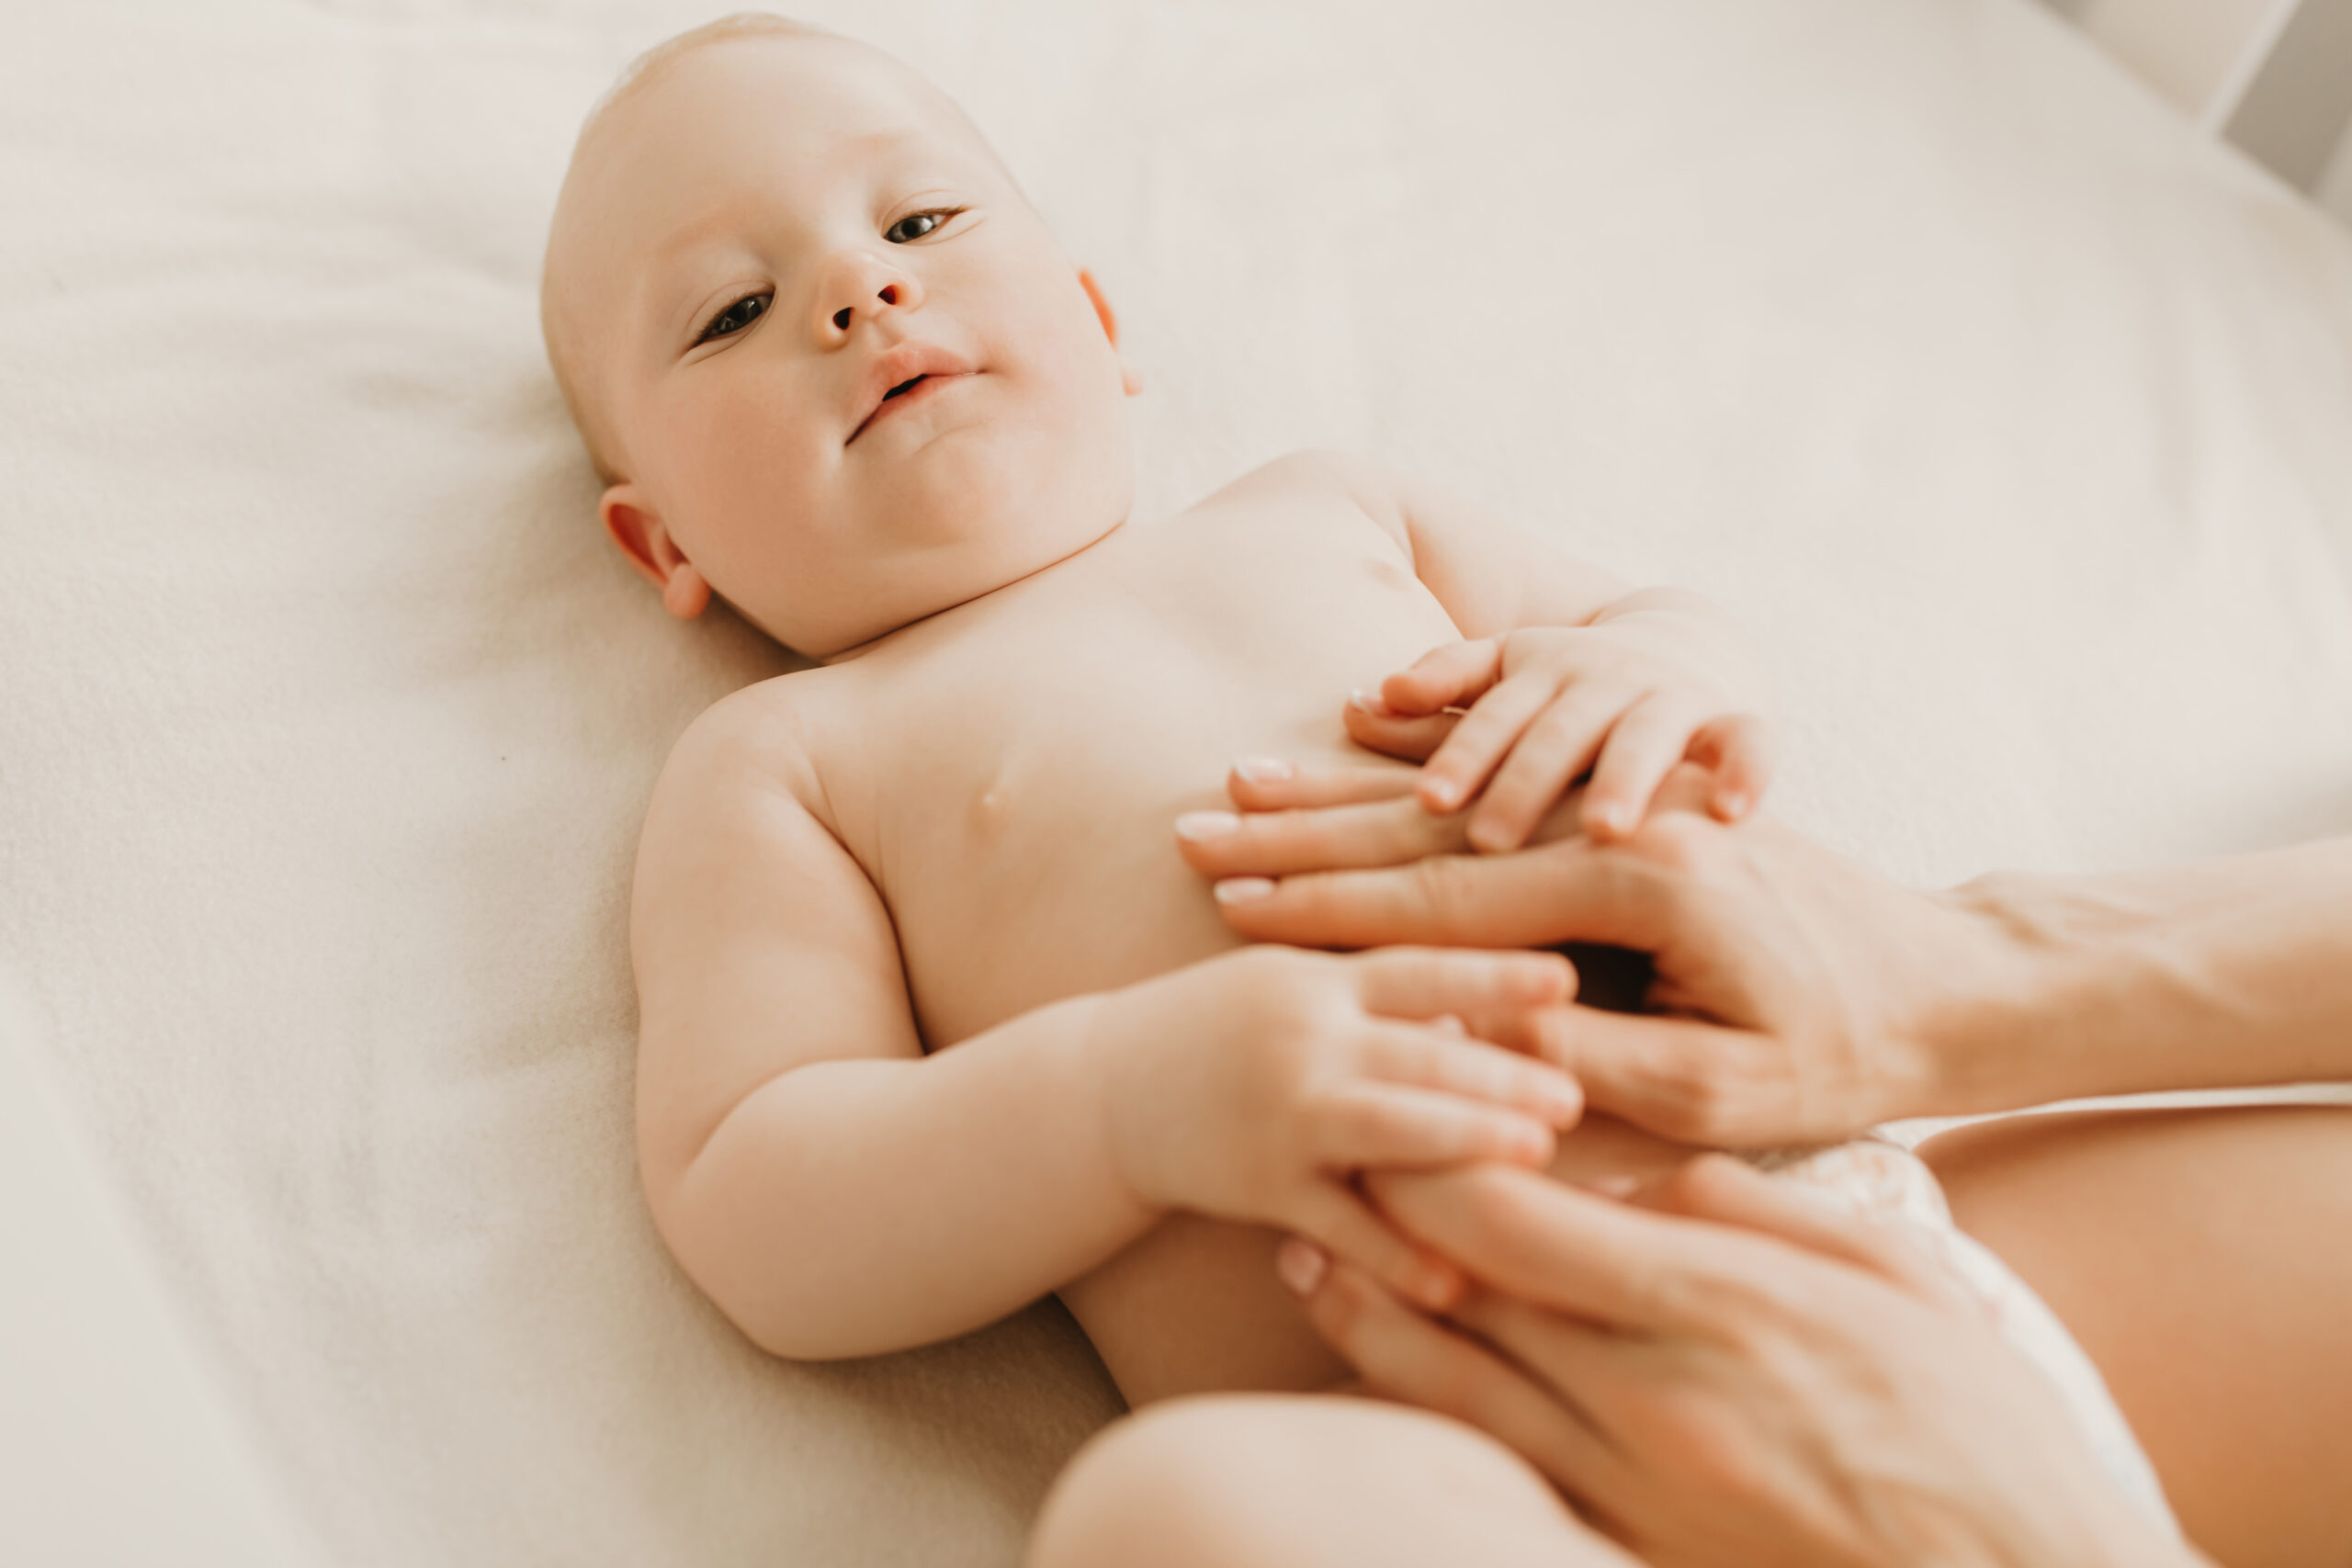 Baby massage, Mom massages the baby's belly during colic